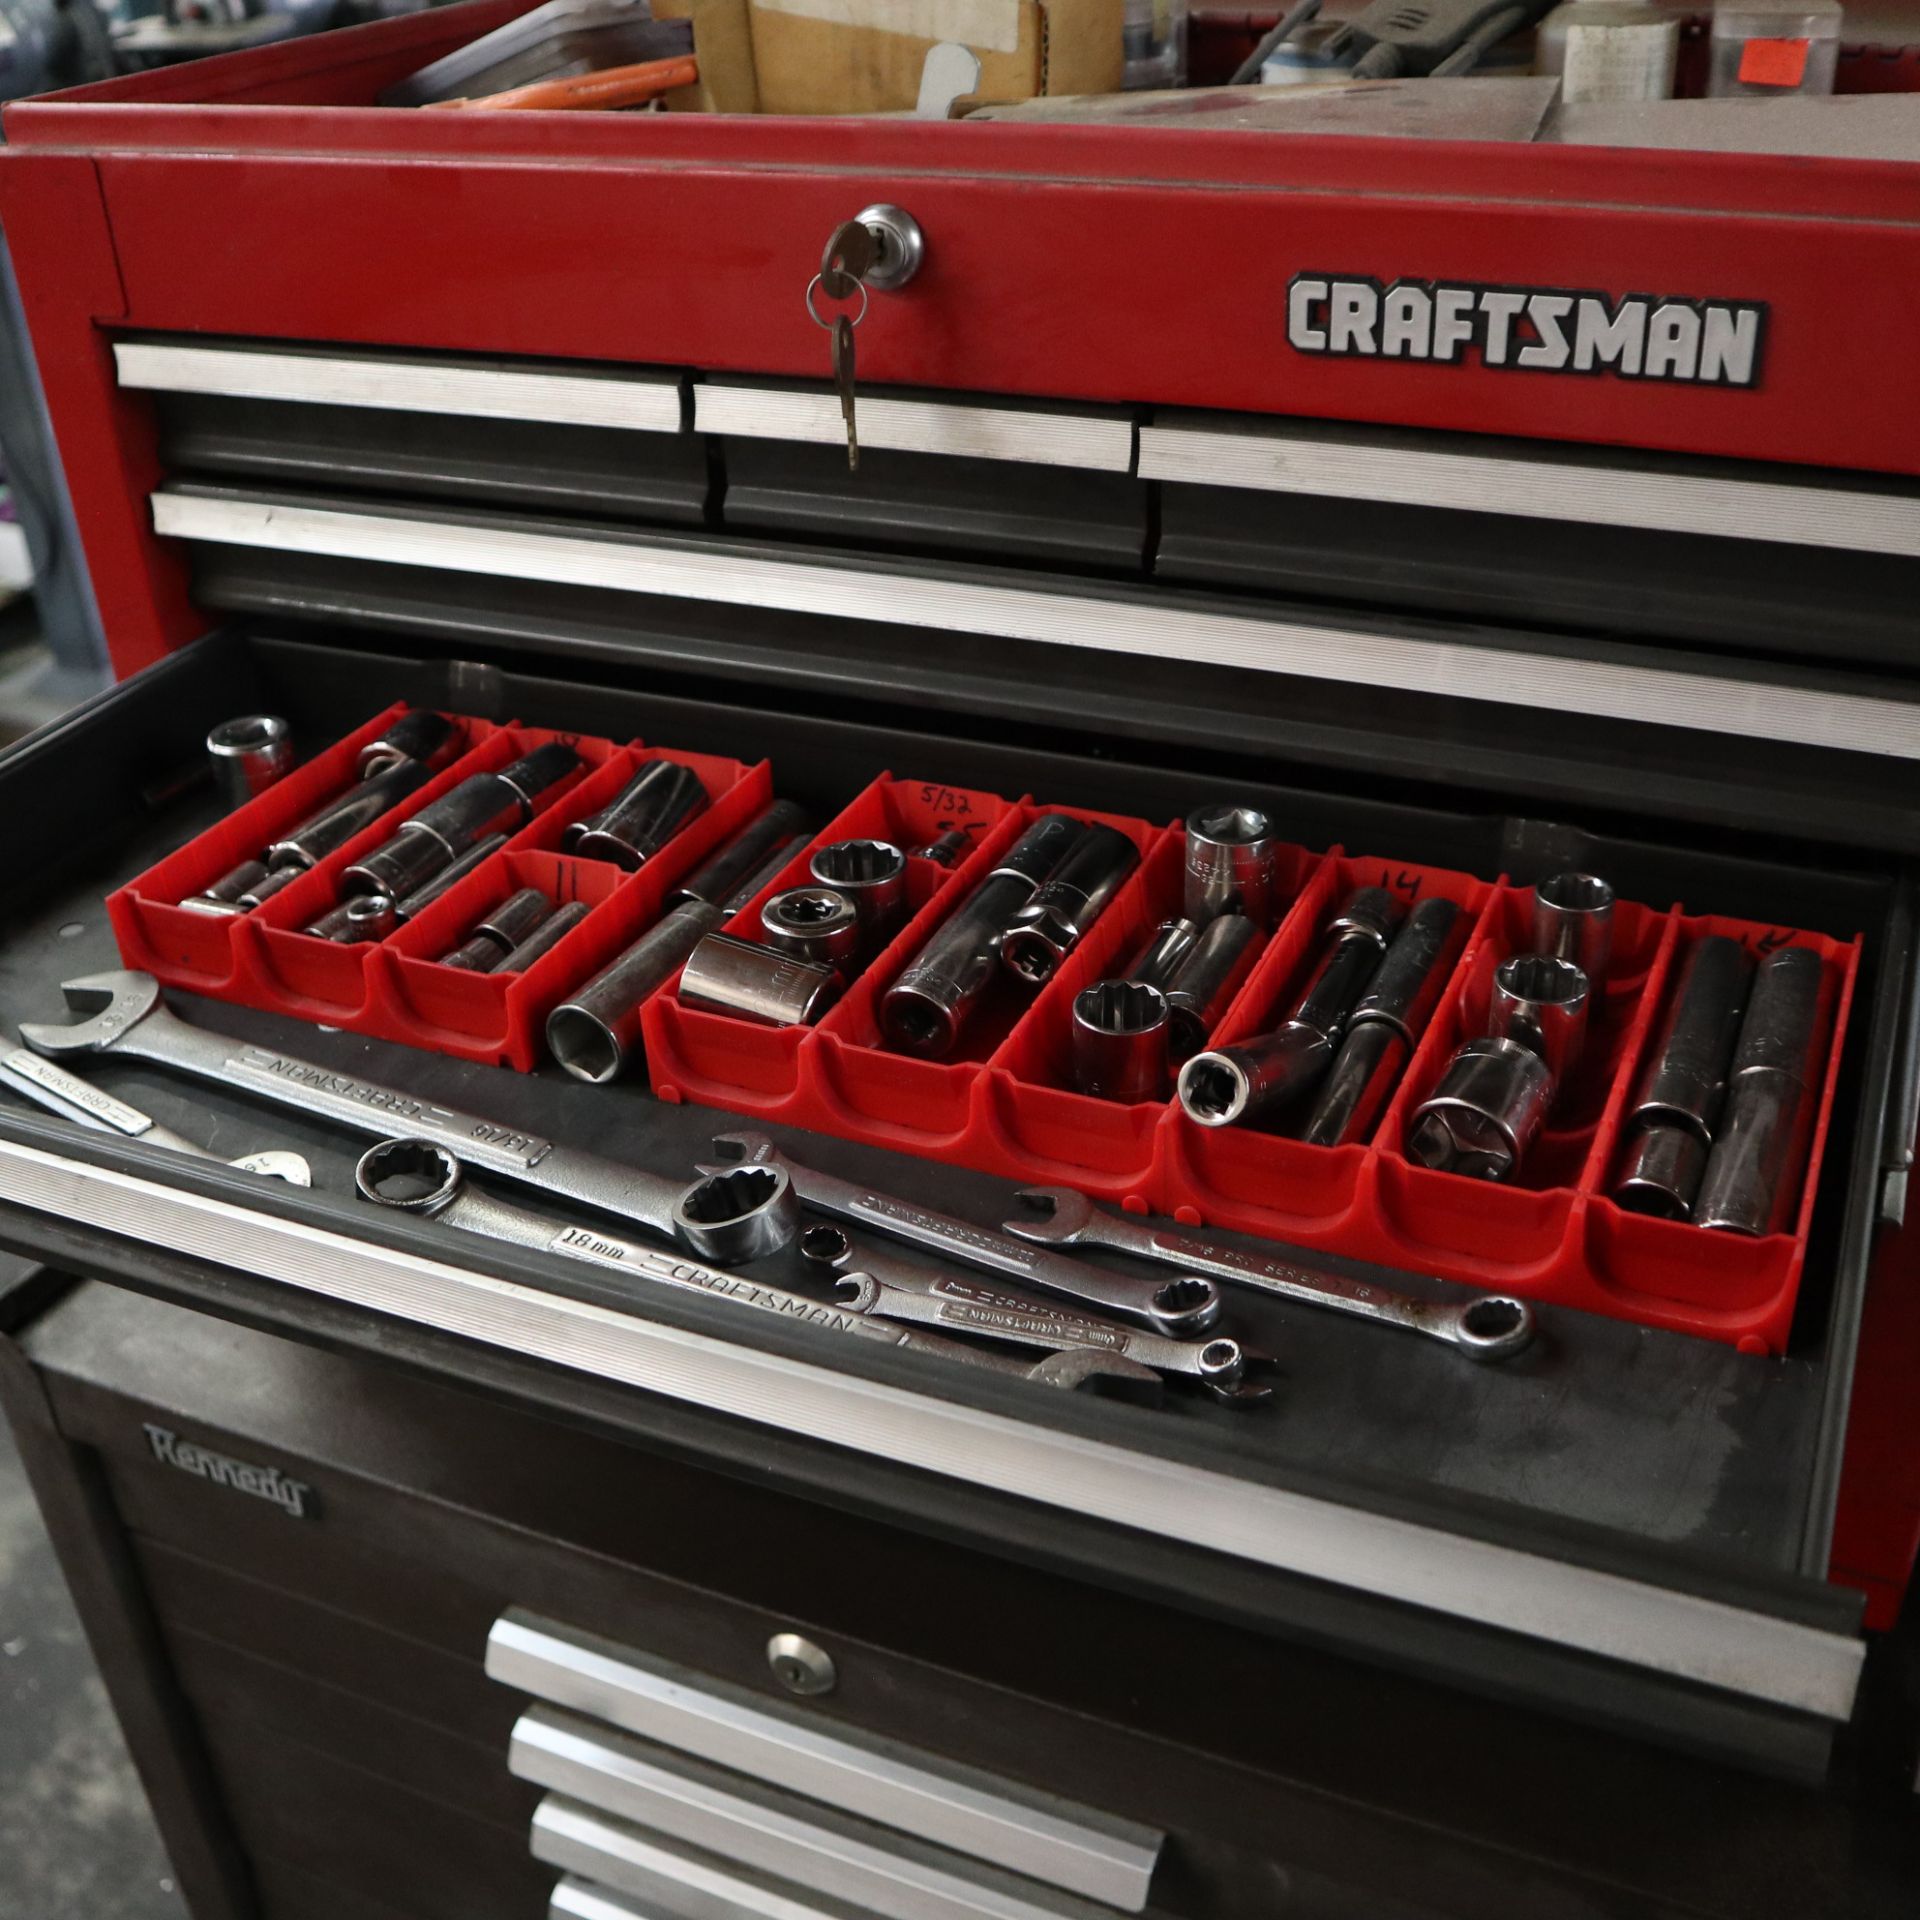 LOT TO INCLUDE: (1) CRAFTSMAN TOOLBOX 9 DRAWER WITH MISC. WRENCHES, SOCKETS, AND TOOLING - Image 6 of 14